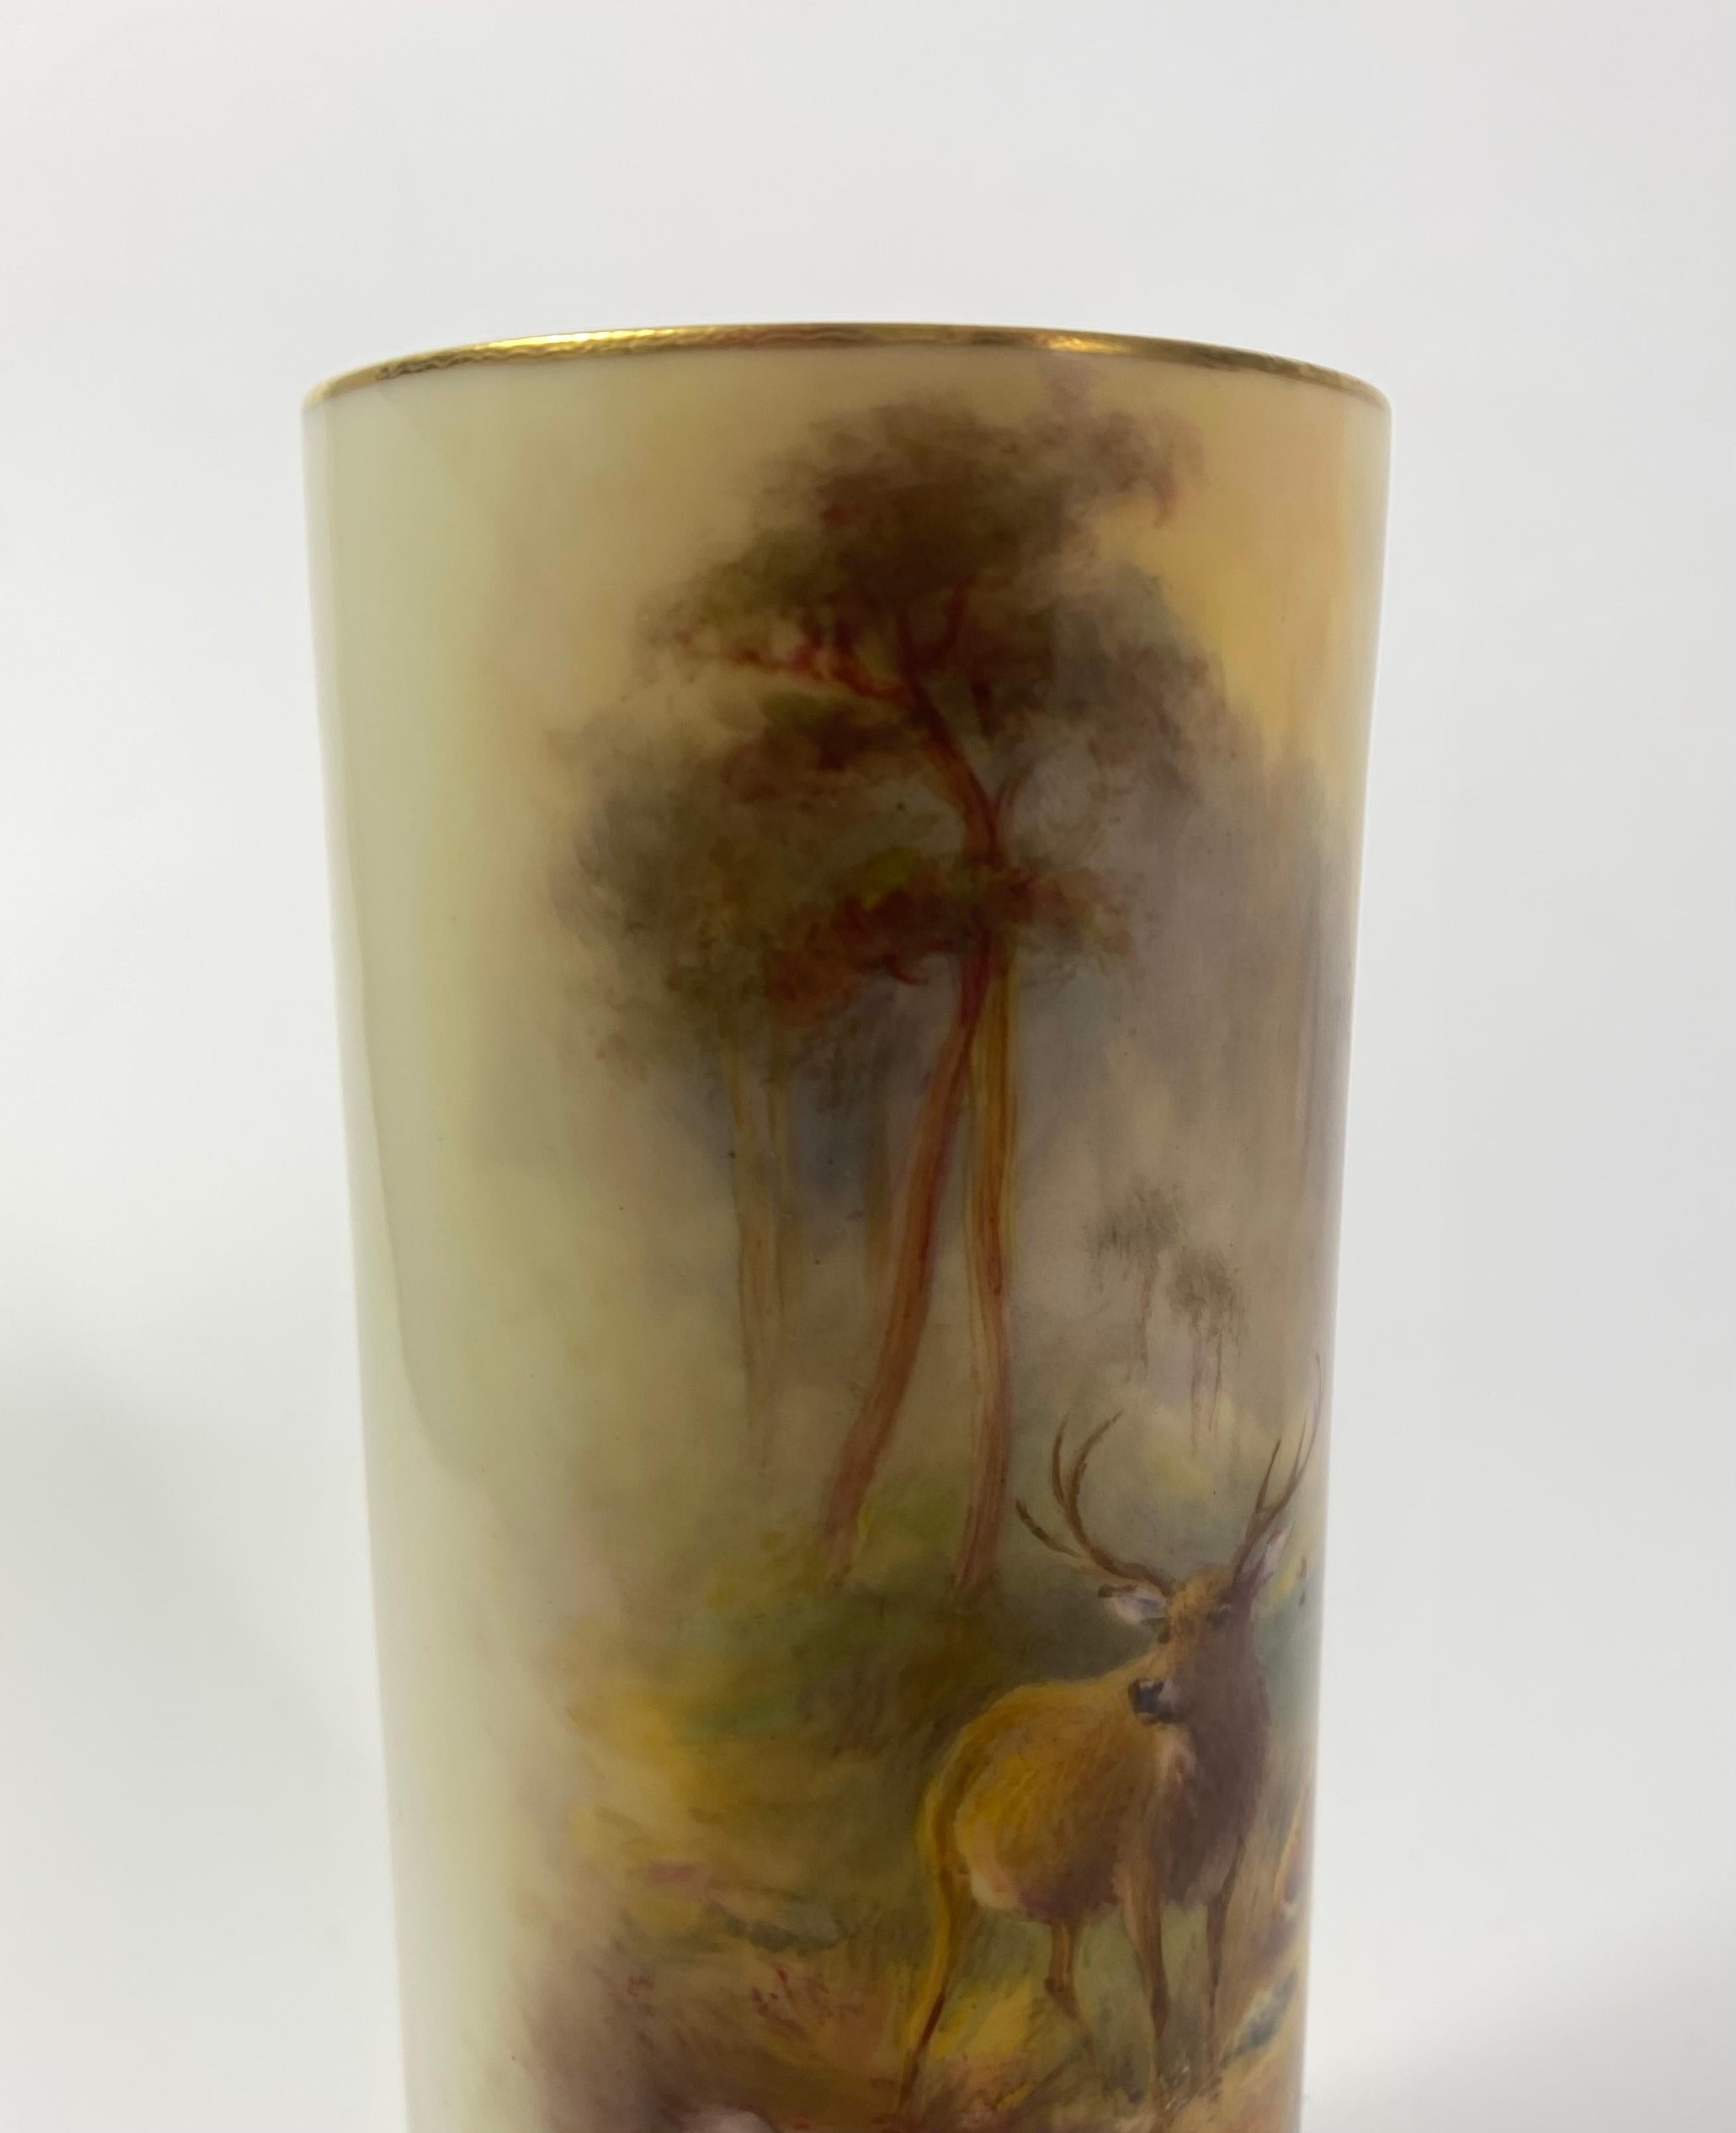 English Royal Worcester vase, Stags, Harry Stinton, D. 1934